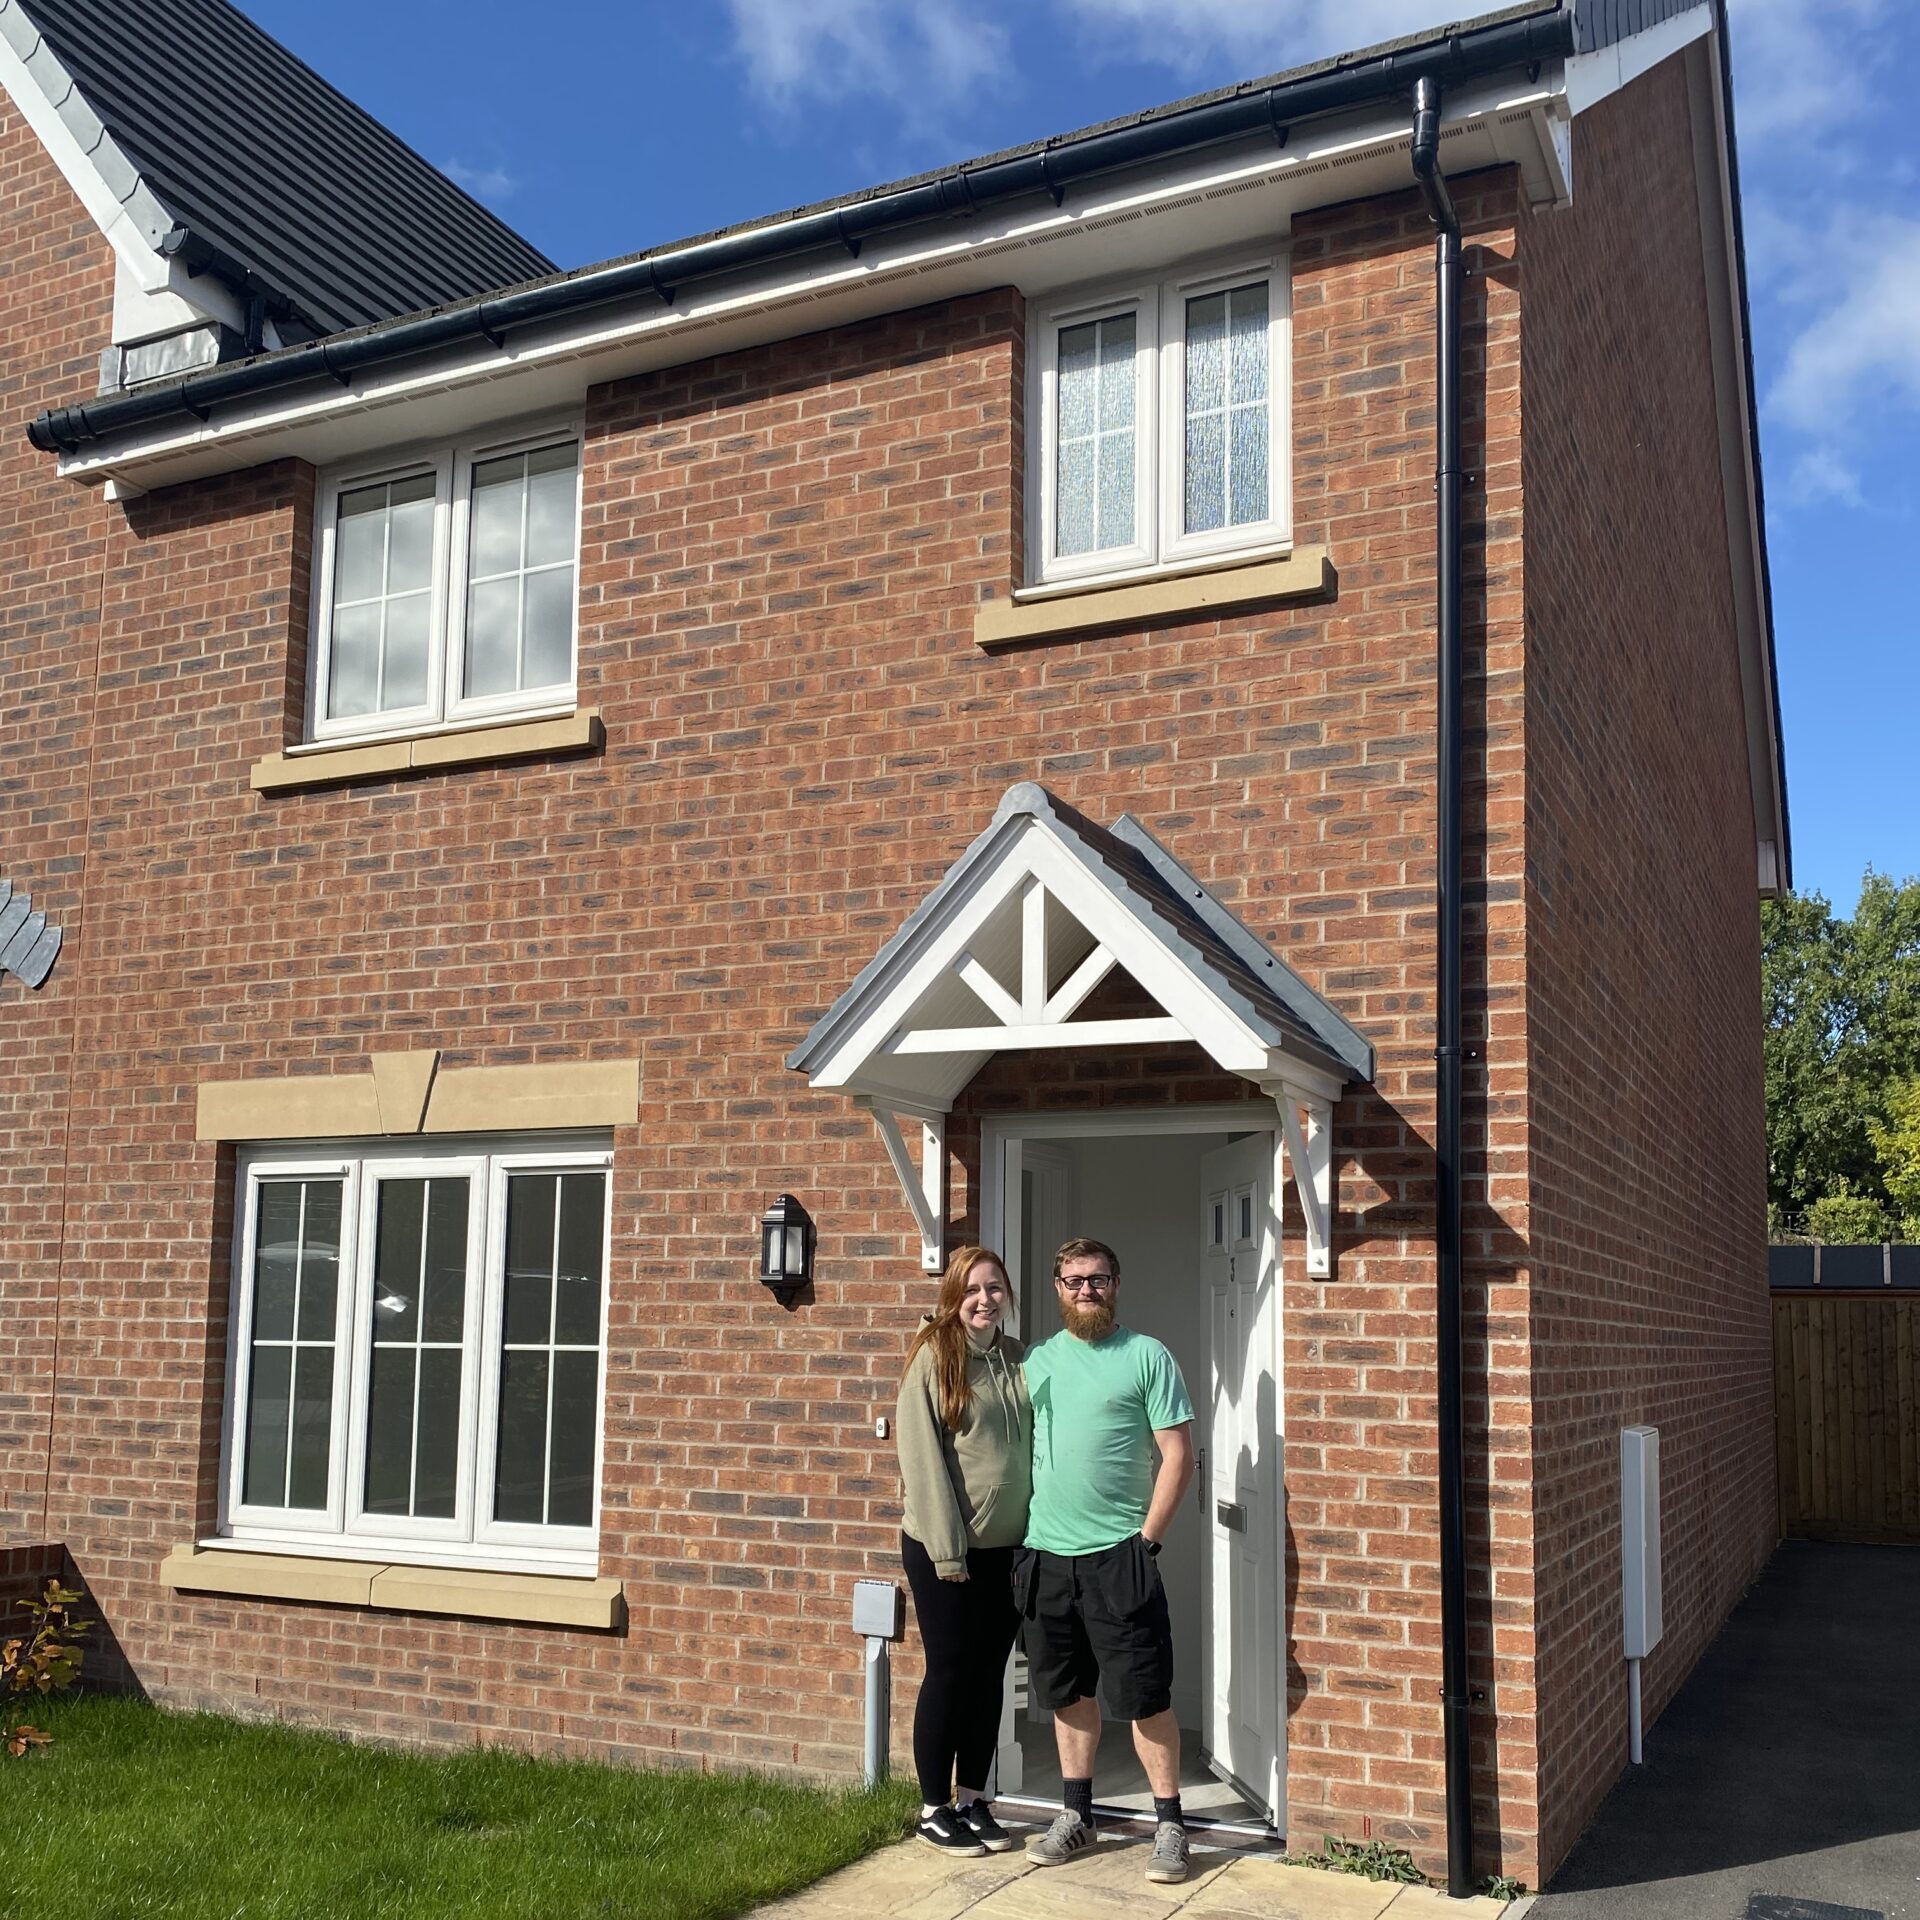 An image of a hapy couple smiling in the doorway of their new home. The home has red brick render and a white gable above the front door